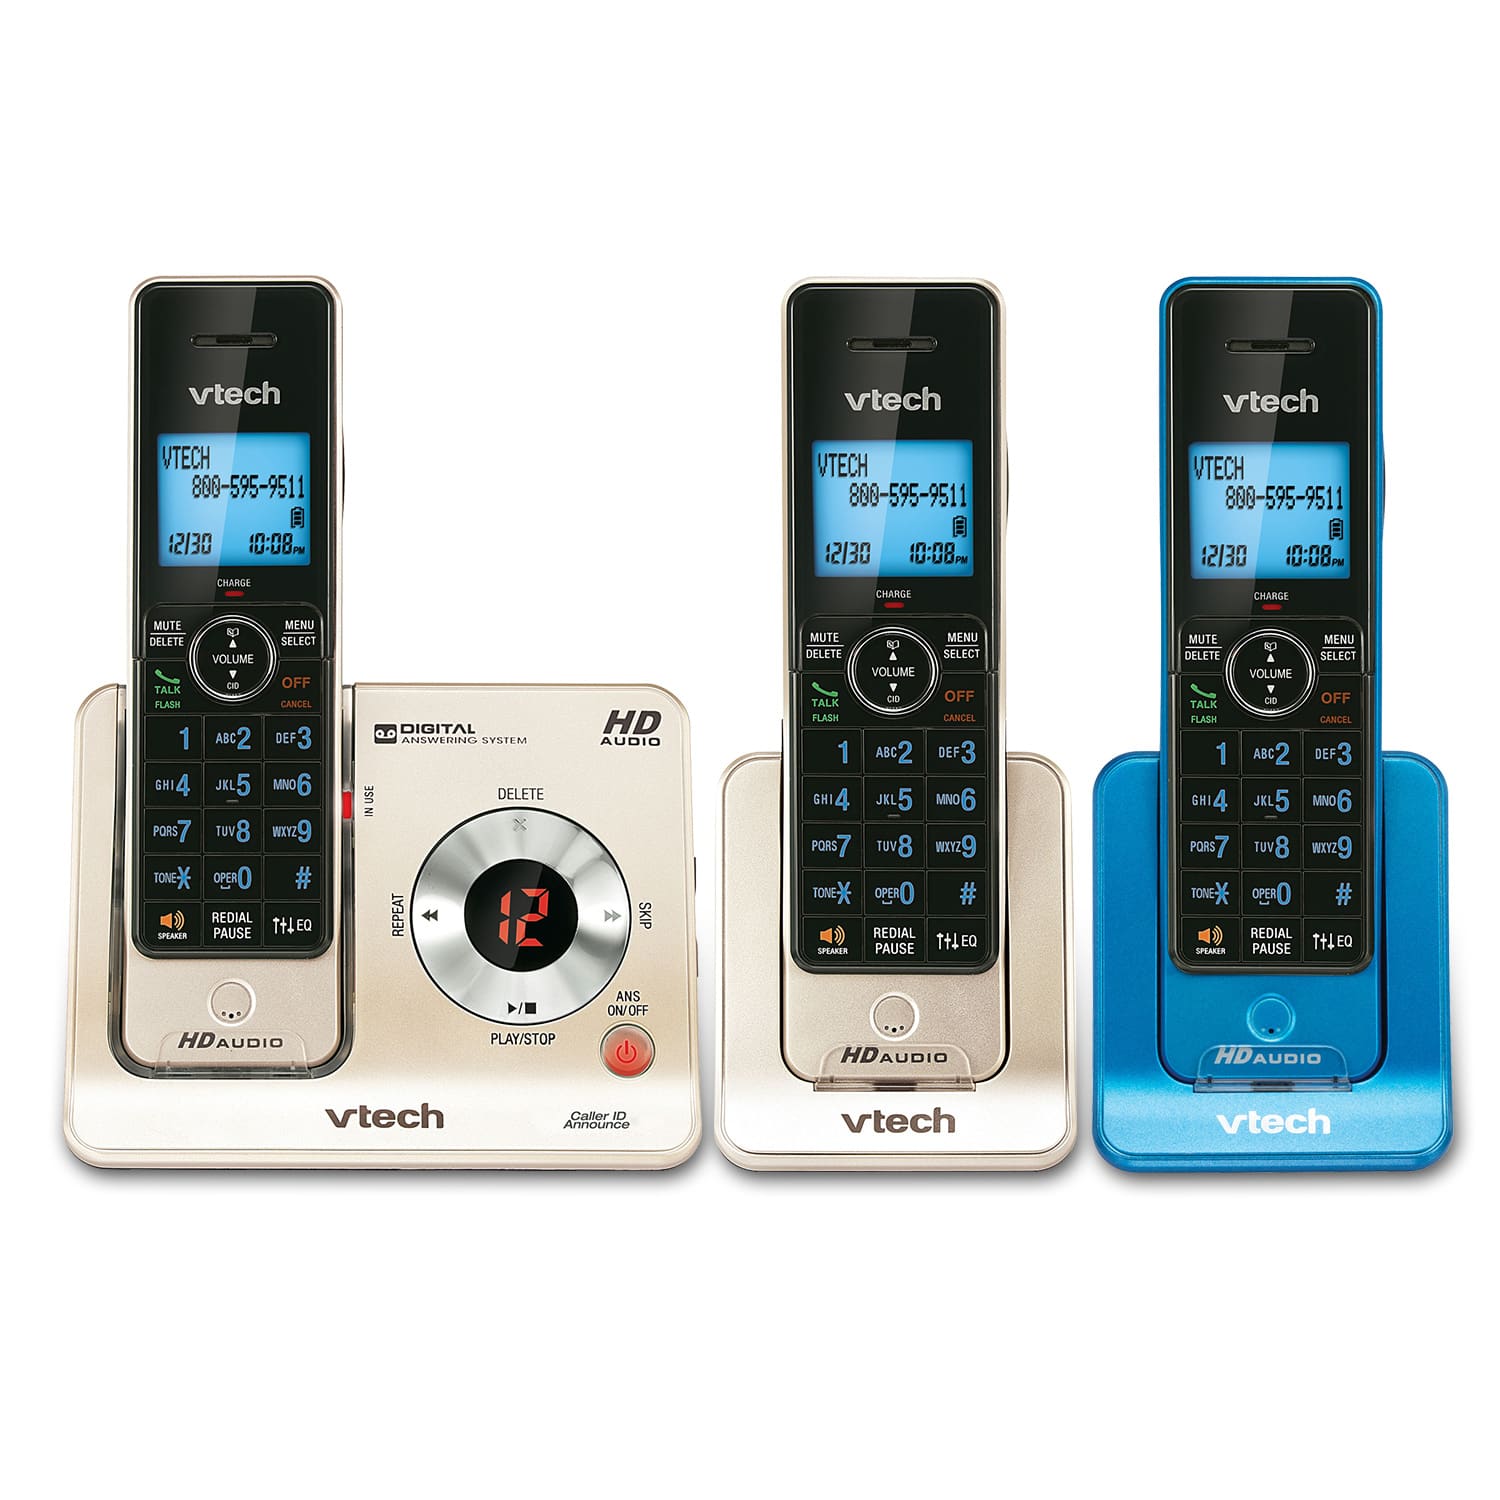 3 Handset Phone System with Caller ID/Call Waiting - view 1